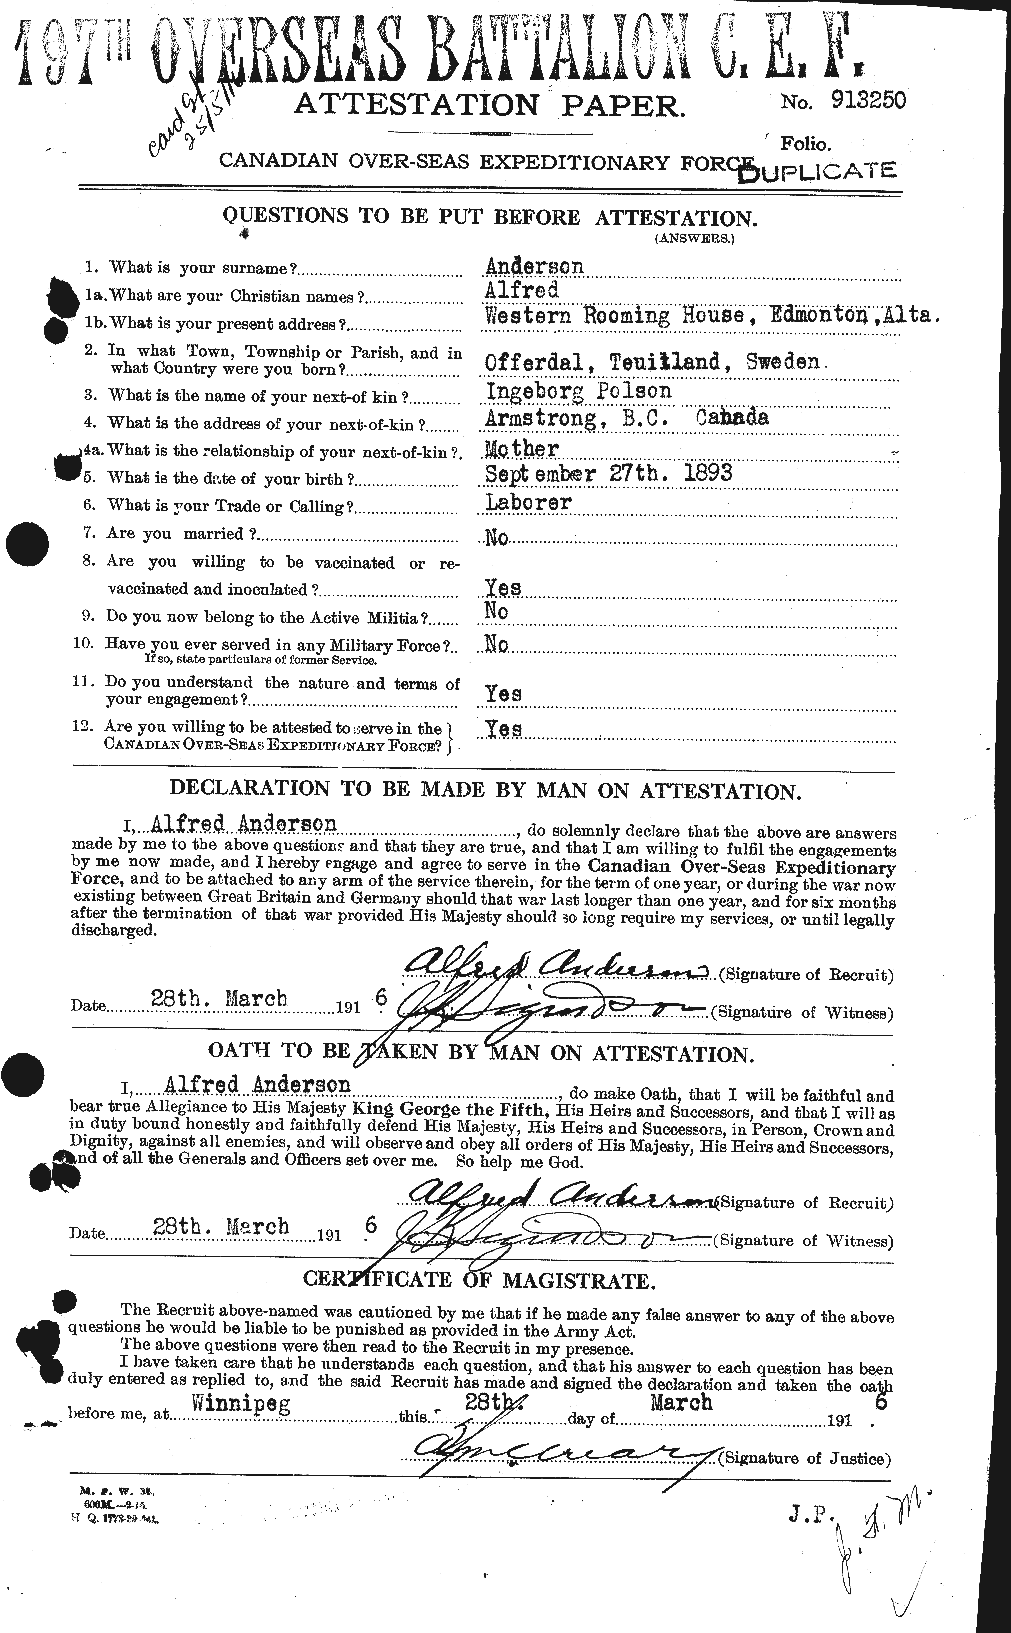 Personnel Records of the First World War - CEF 209460a